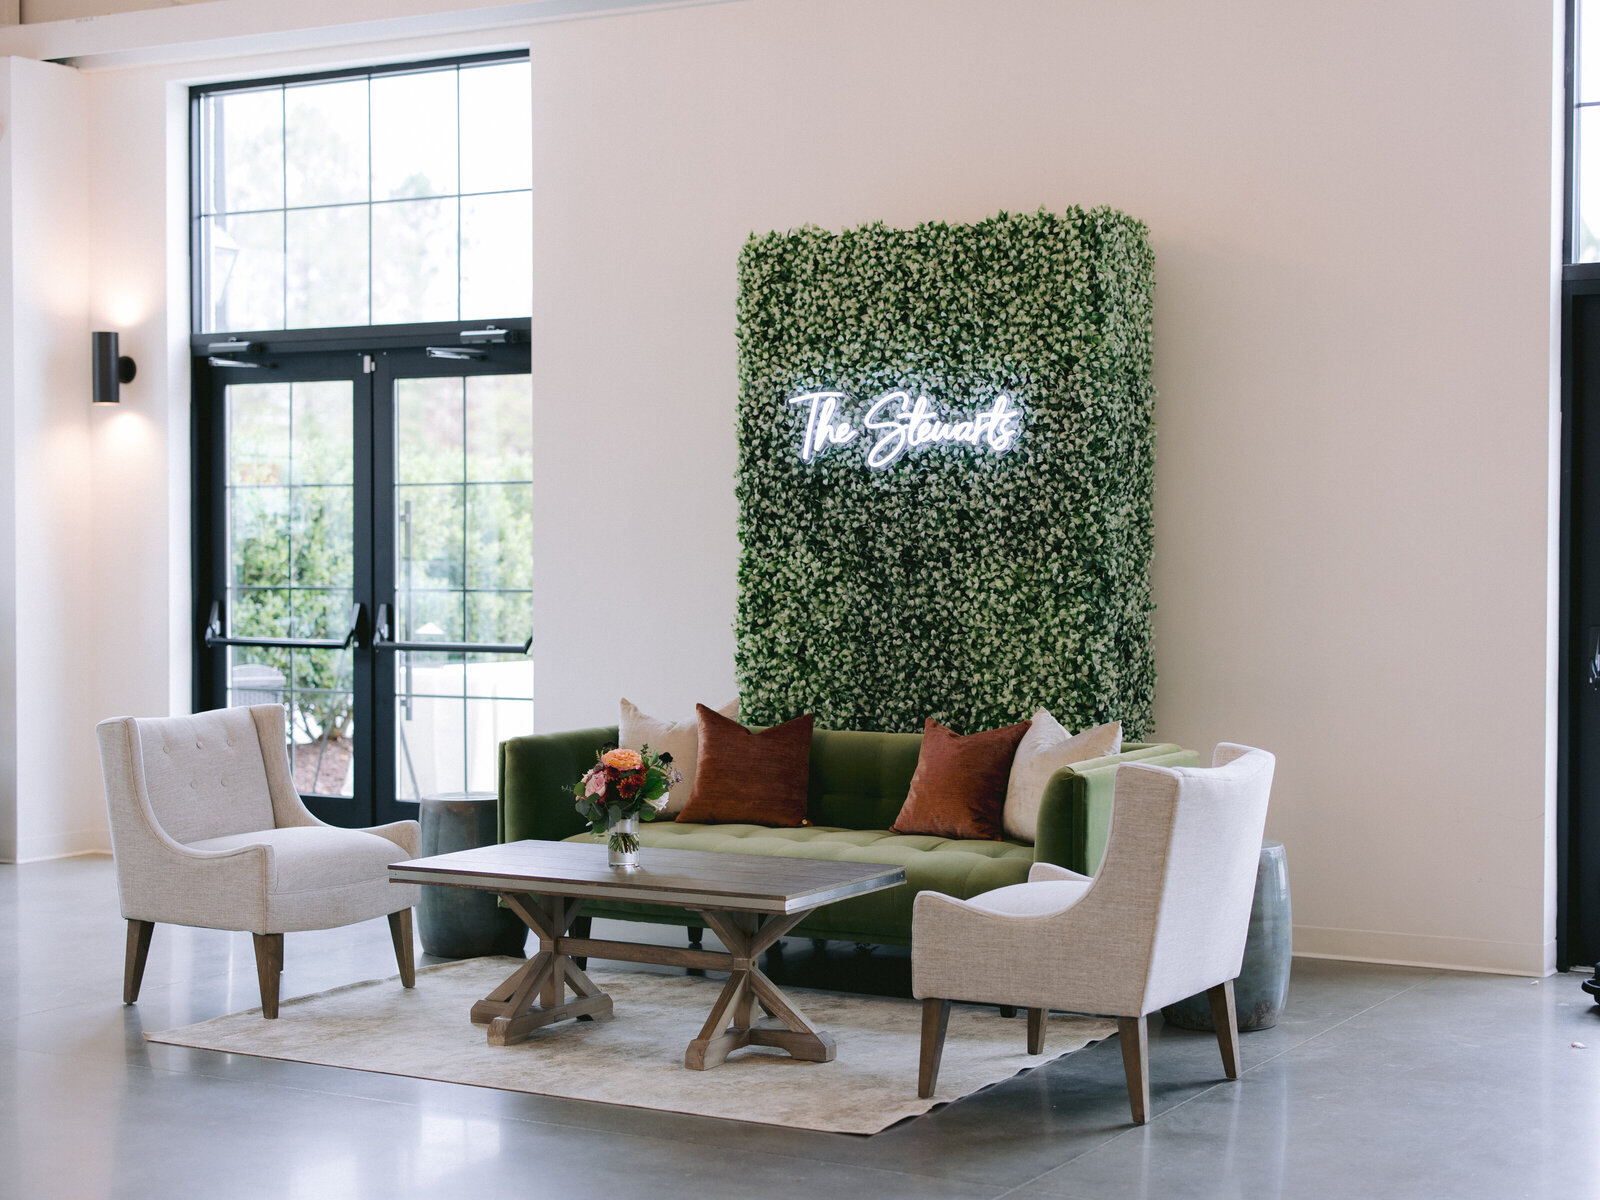 lounge set in front of boxwood wall with neon sign